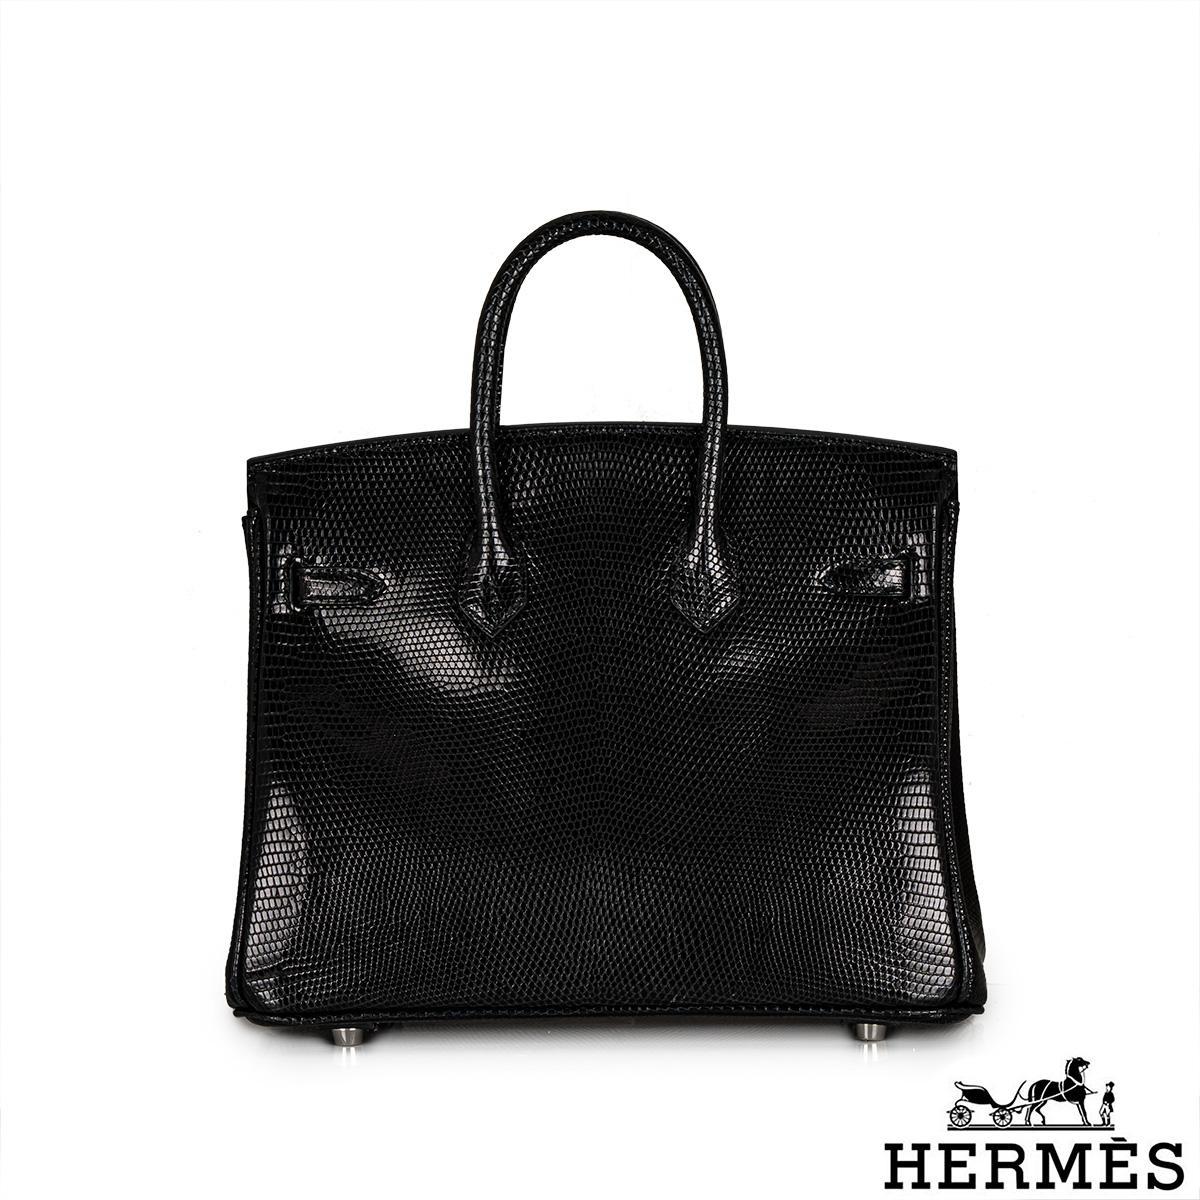 An alluring Hermès Exotic Birkin 25cm handbag. The exterior of this exotic Birkin is in shiny Noir Lezard Niloticus Lisse with tonal stitching. It adorns palladium hardware, two top handles and front toggle closure. The interior features a zipper